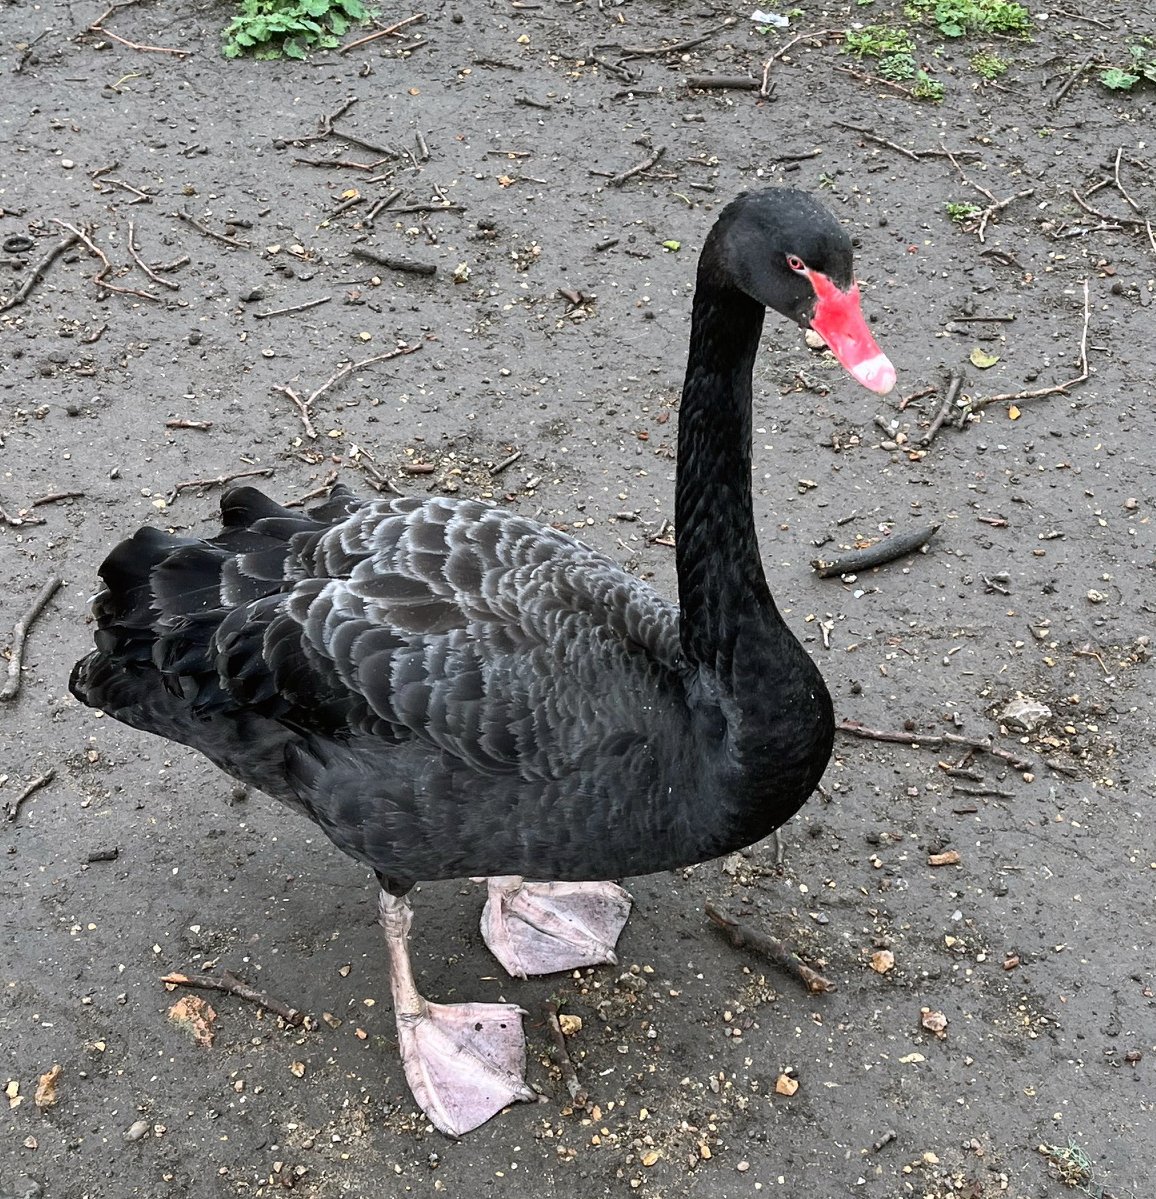 A friend found this fantastic #BlackSwan in St James's Park last weekend. I'm definitely heading off in search of more this weekend!

#ZeroRiskNovel #BlackSwanThriller